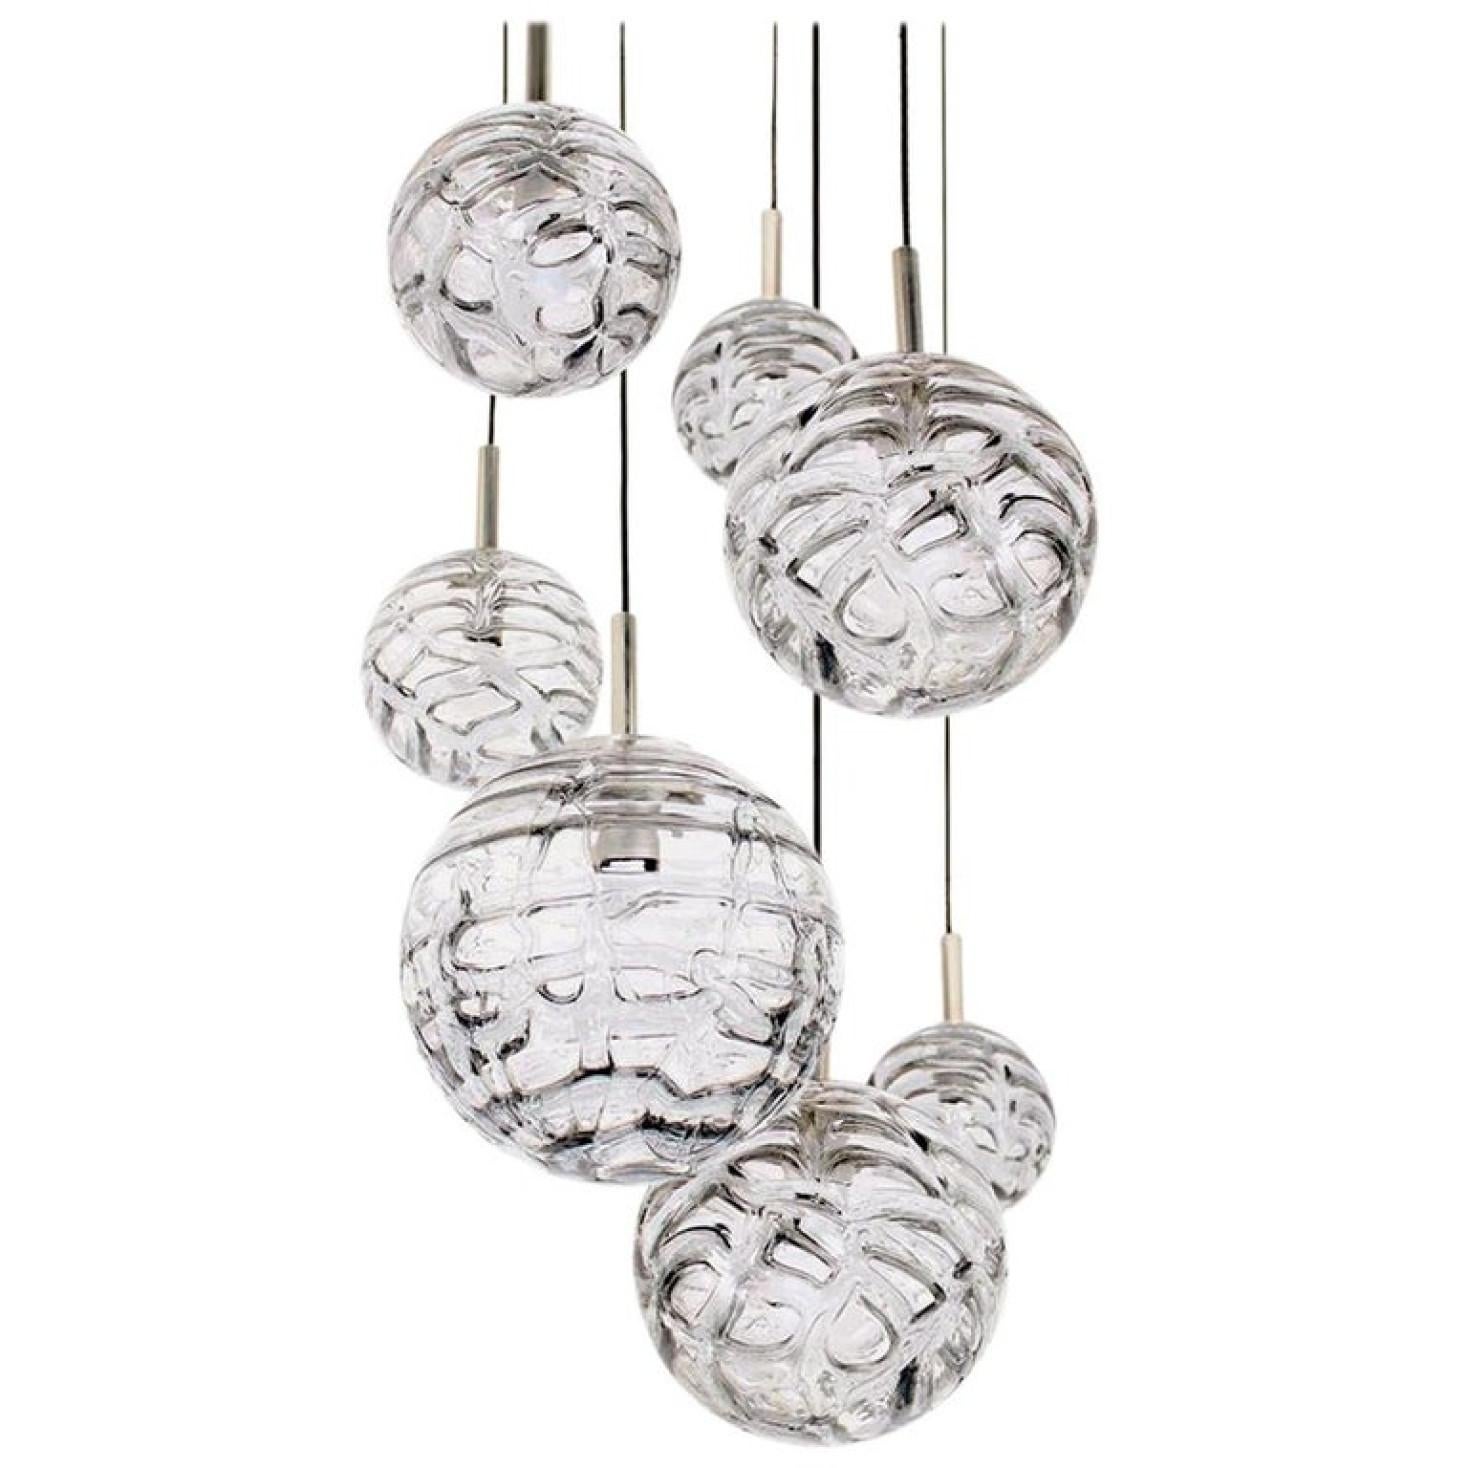 1 of the 7 stunning Murano glass globes. Outstanding high- end quality design with an amazing color. High-end hand blown heavy glass spheres.
A statement piece in the any room. Wonderful light effect due to lovely glass elements.

The price is per